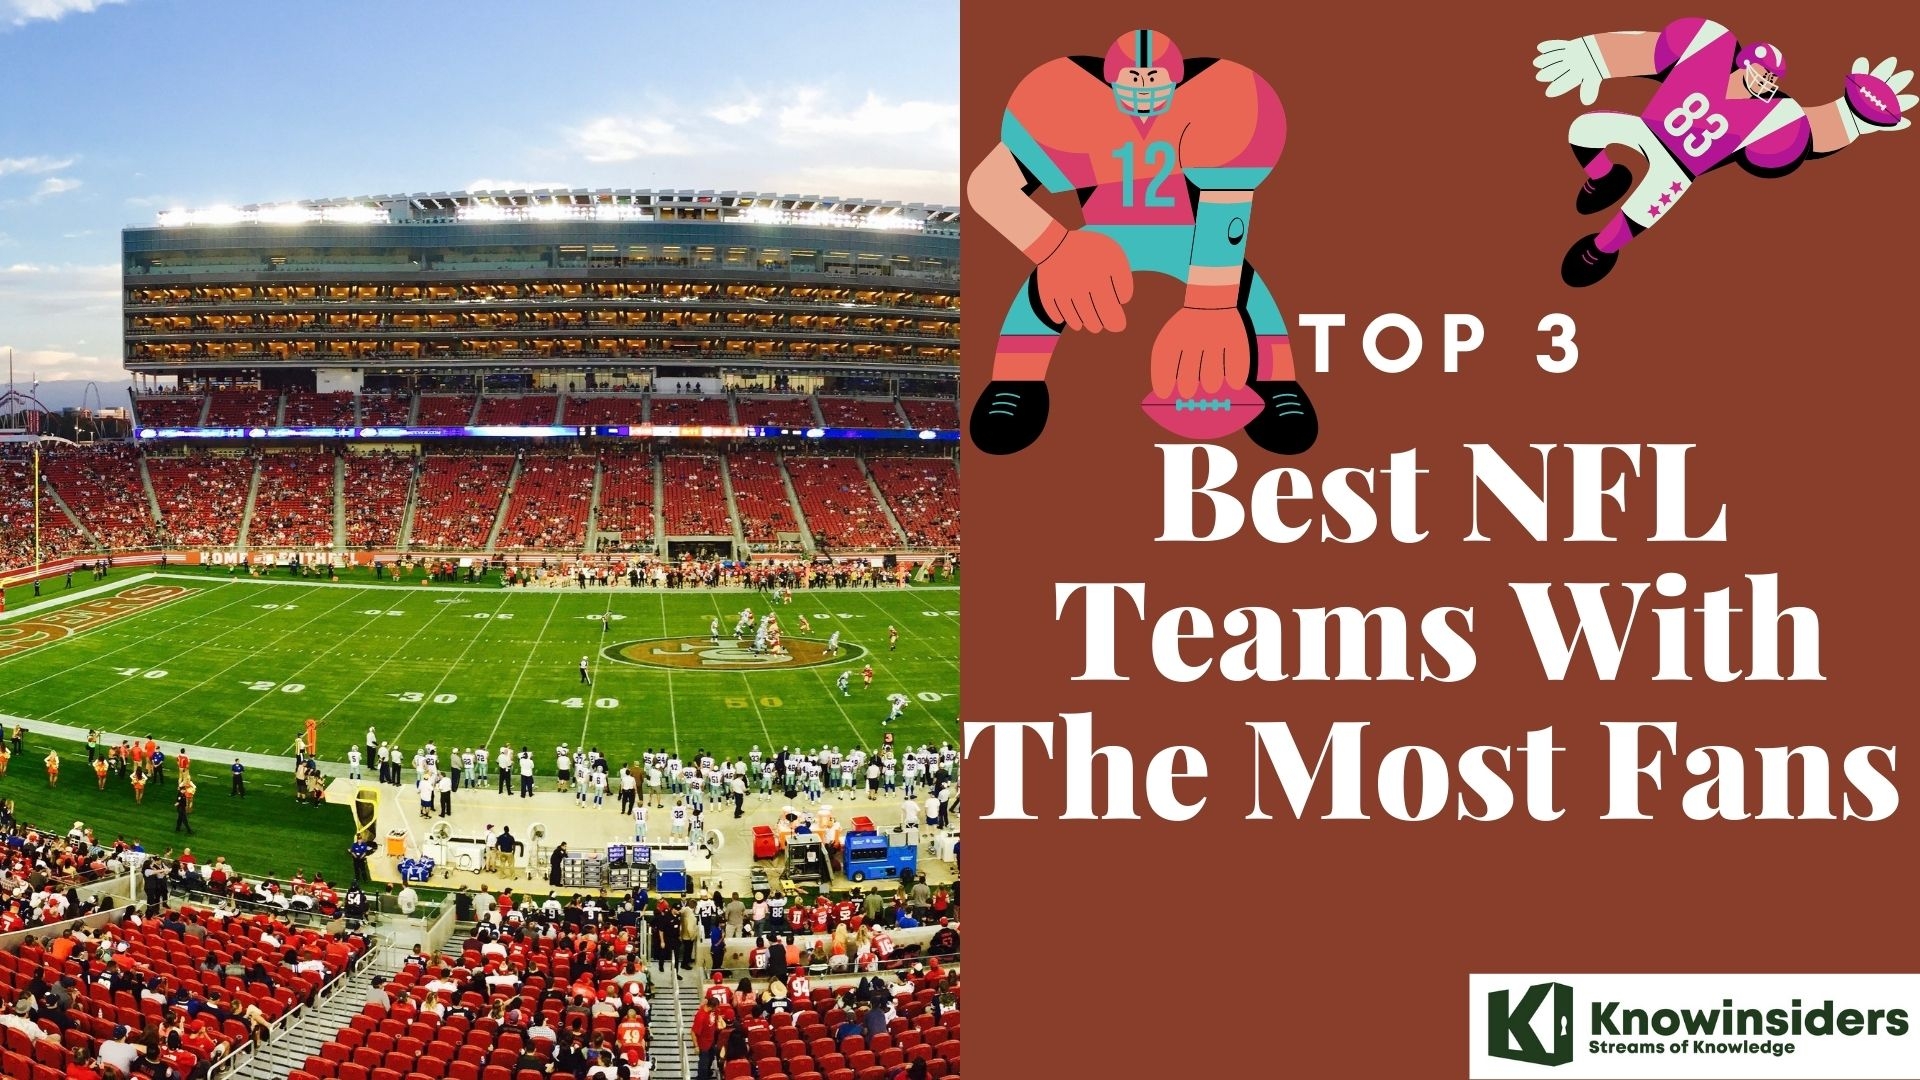 Top 3 NFL Teams With The Most Fans: Which One Is The Most Popular?